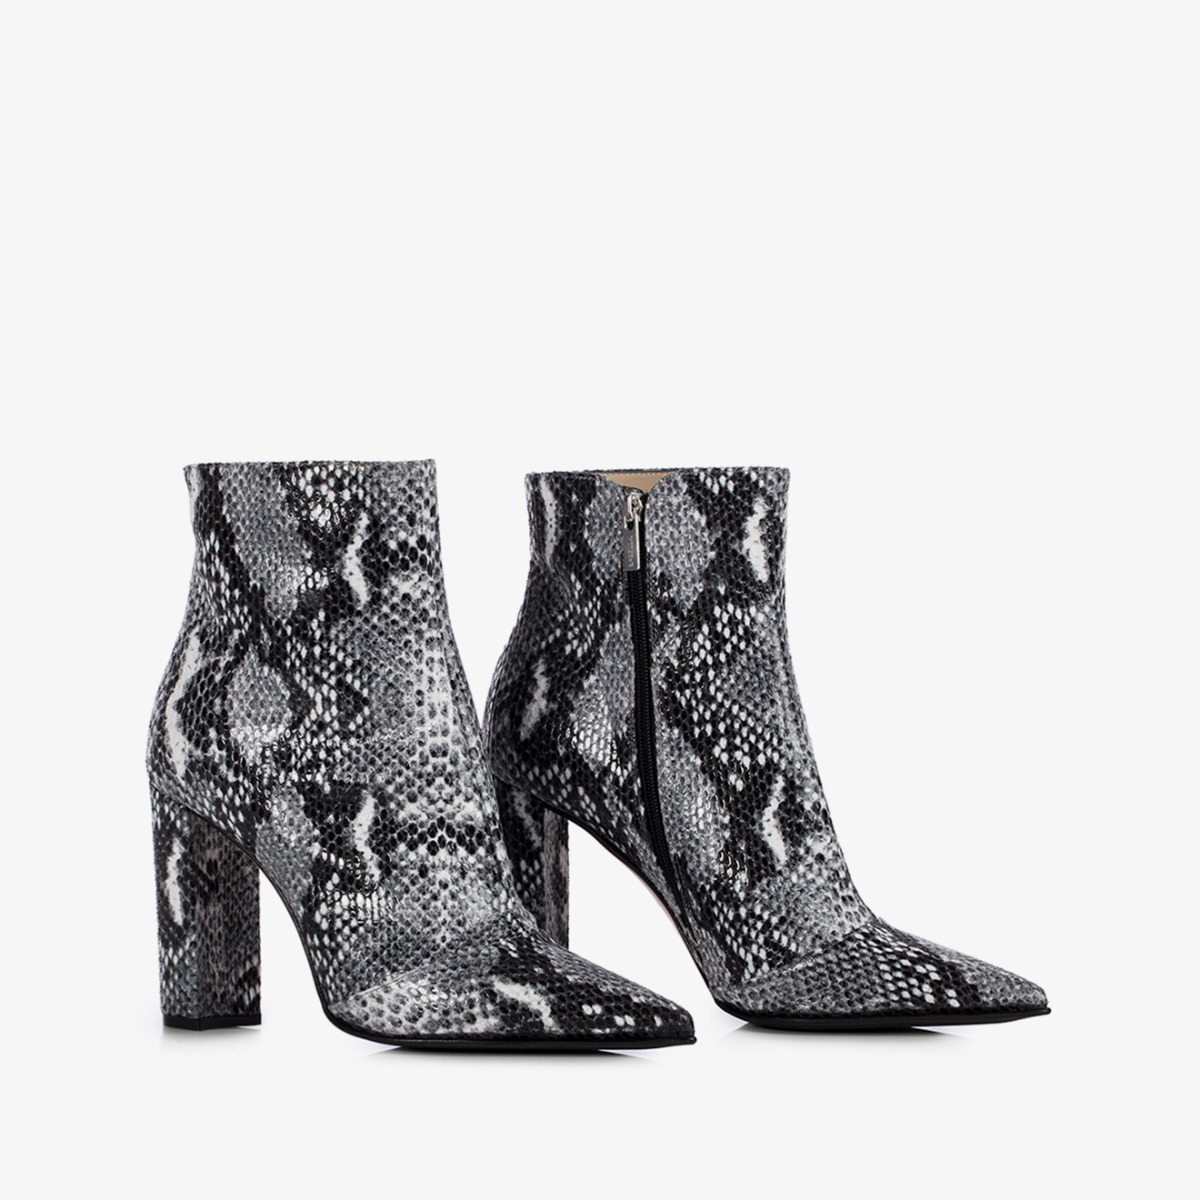 MEGAN ANKLE BOOT 100 mm - Le Silla official outlet